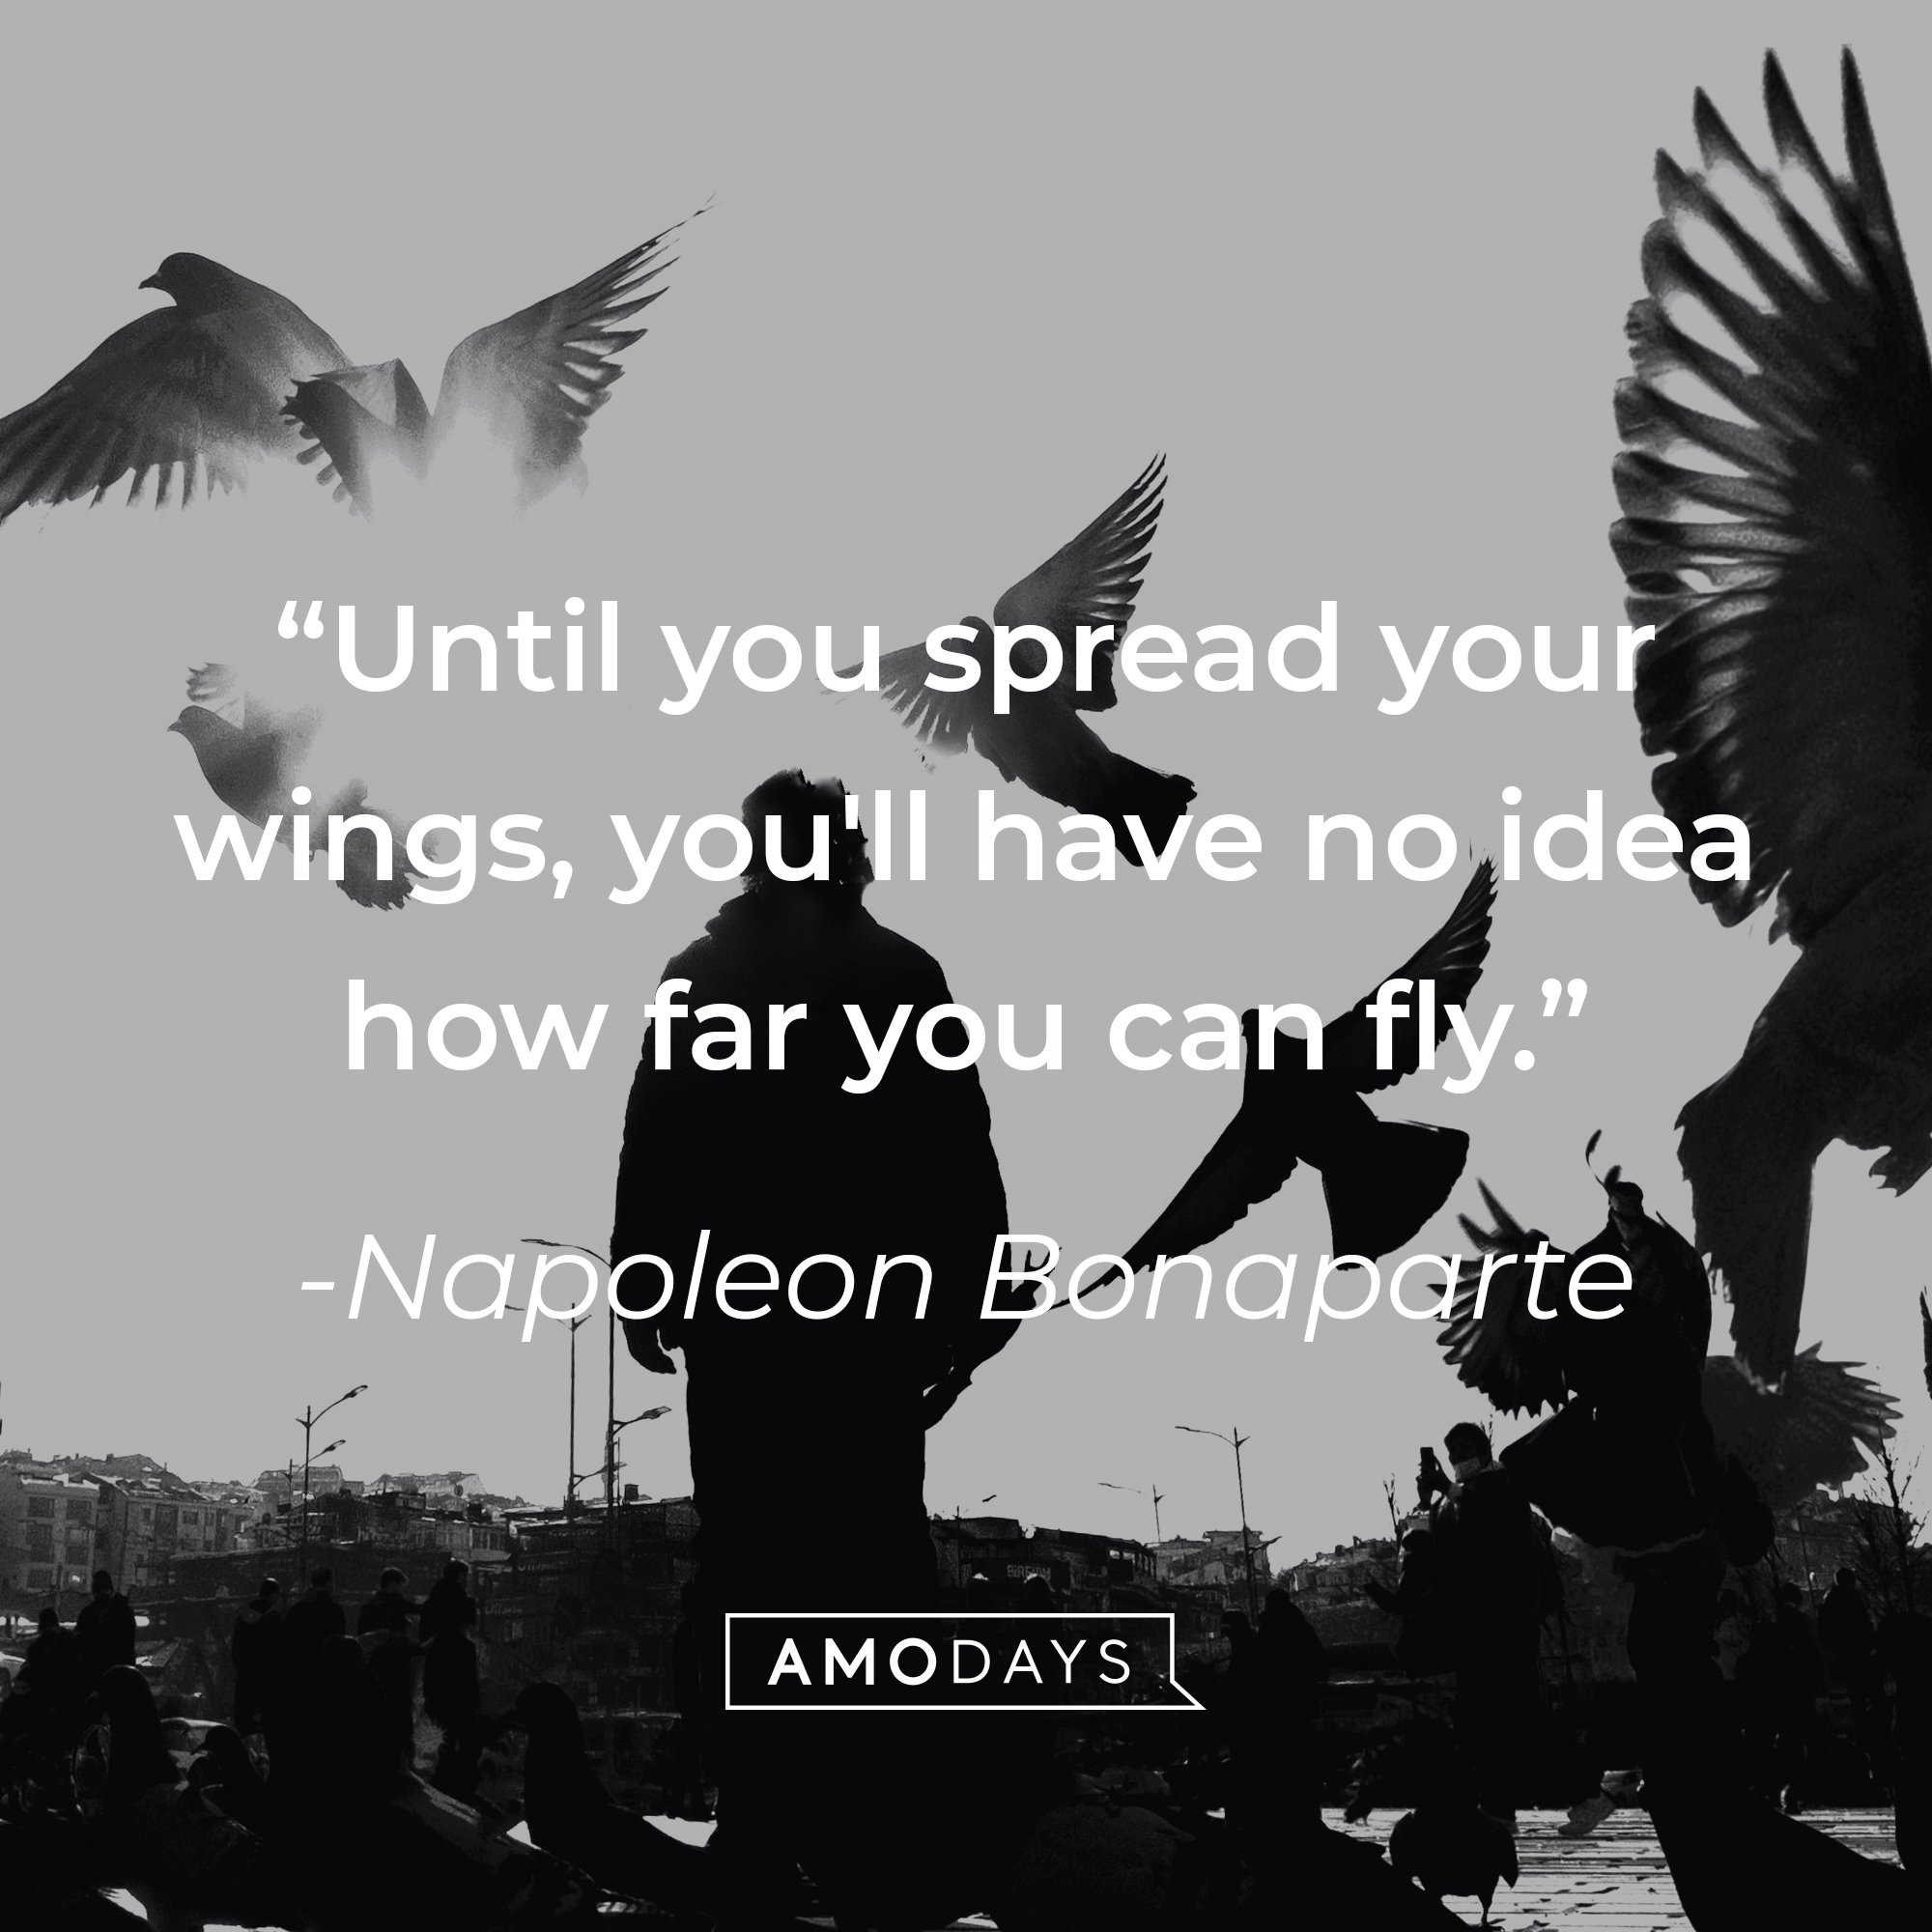 Napoleon Bonaparte's quote: "Until you spread your wings, you'll have no idea how far you can fly." | Image: AmoDays